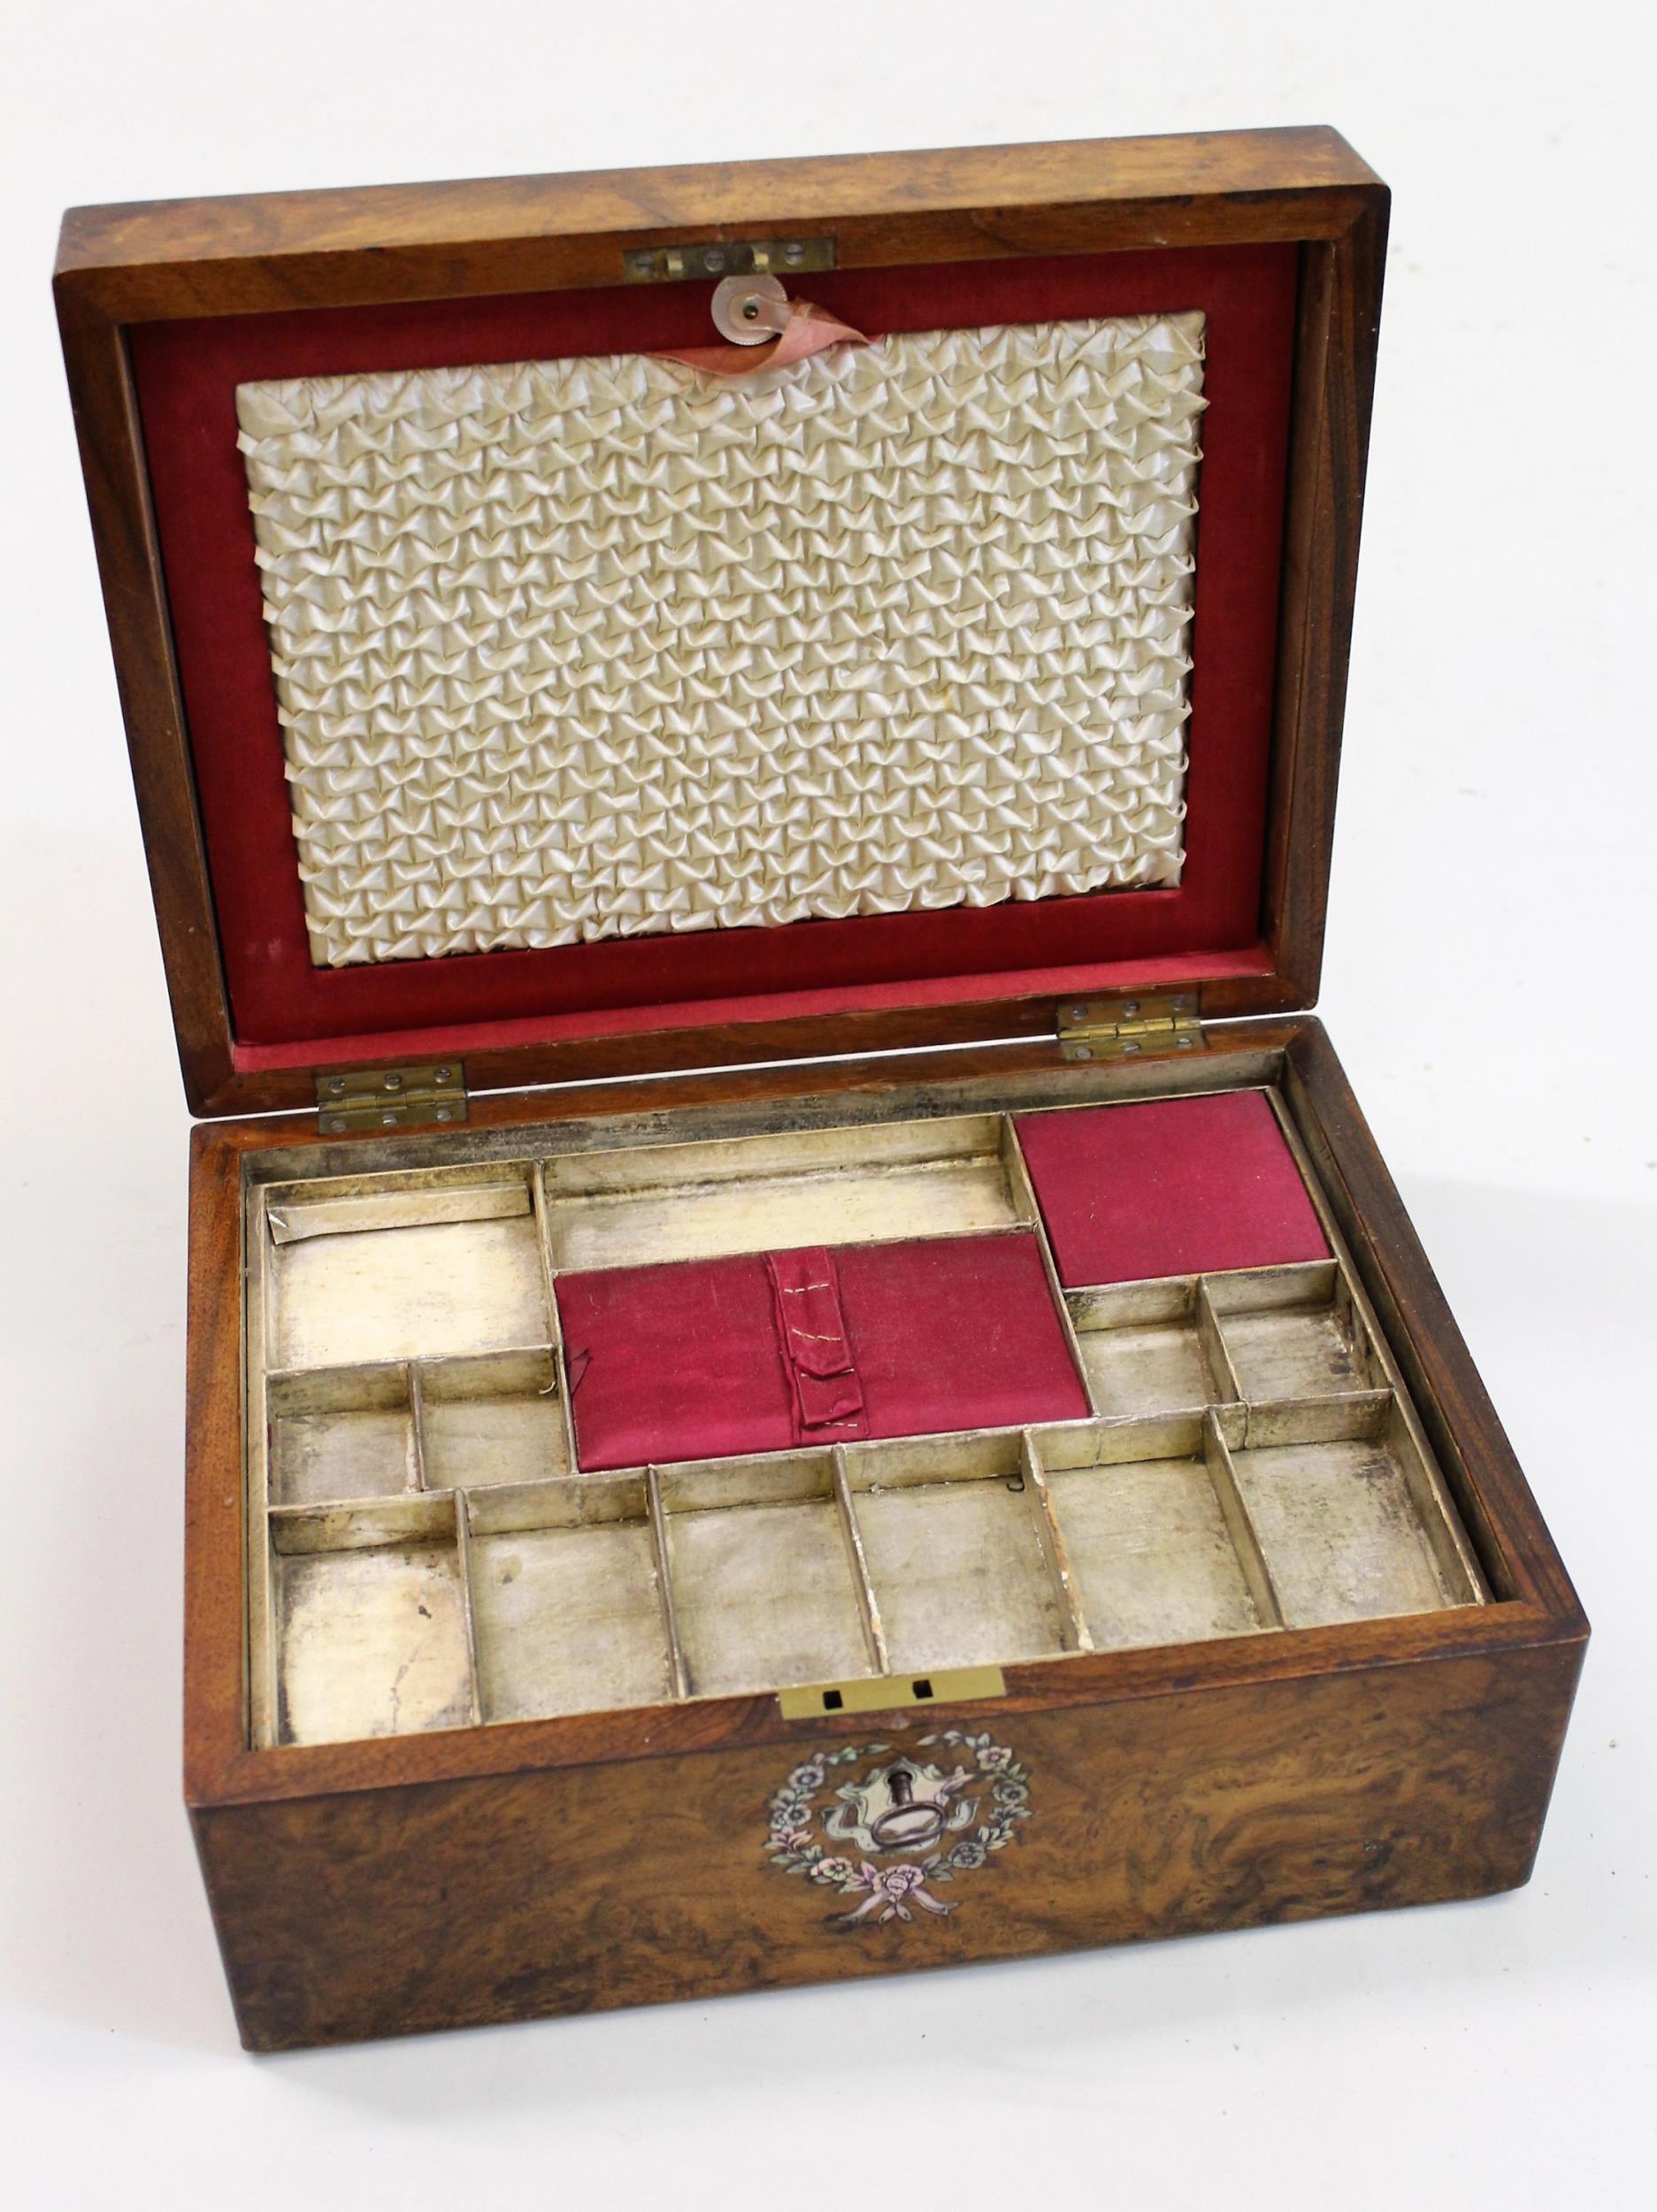 19th Century burr walnut and mother of pearl inlaid work box with partially fitted interior, - Image 2 of 2